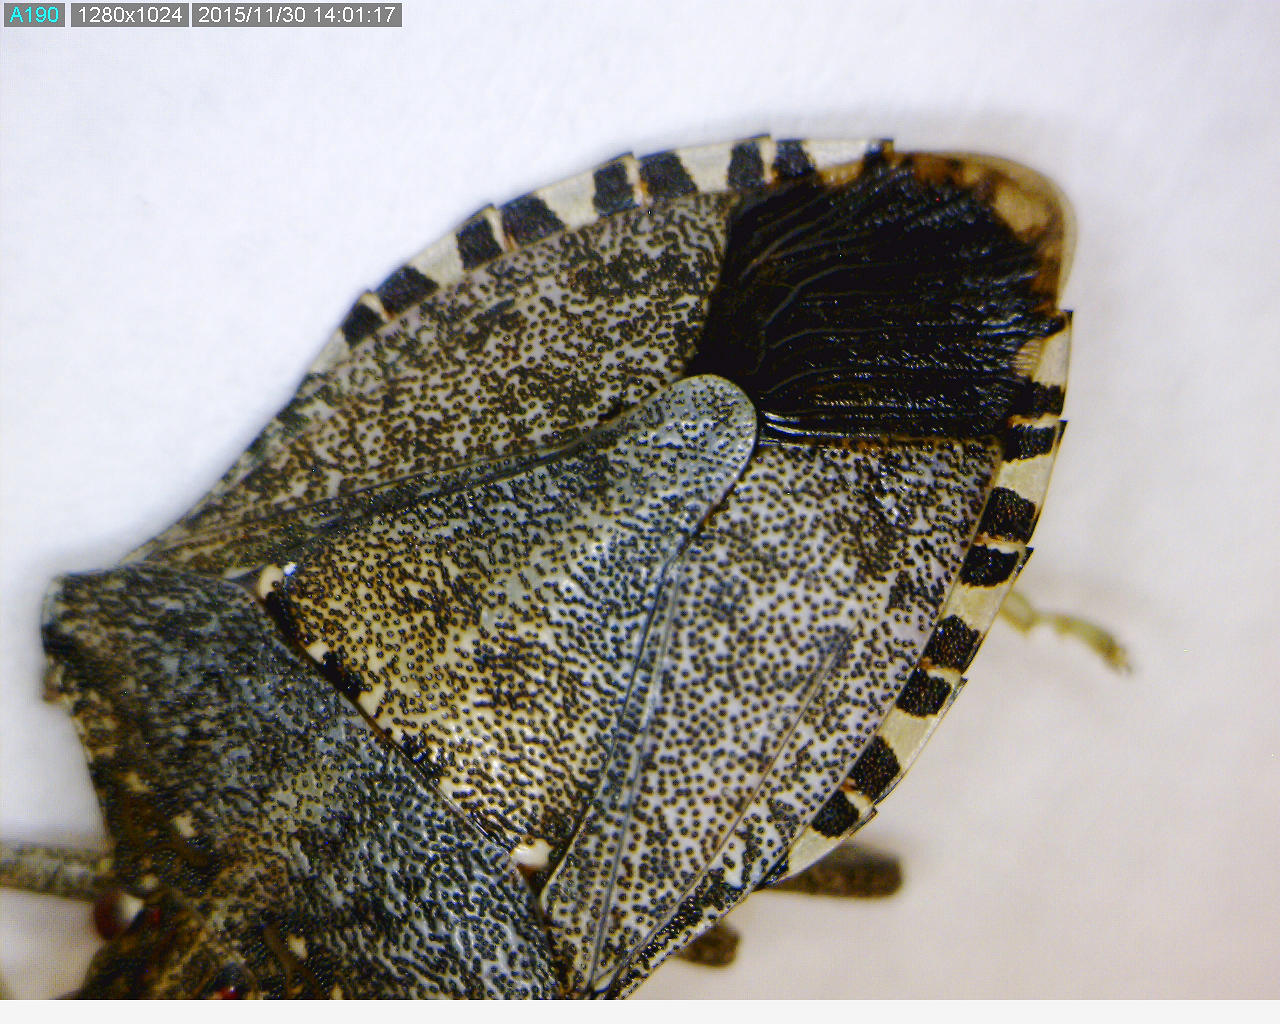 Marginal dorsal banding pattern of the abdomen of a brown marmorated stink bug.